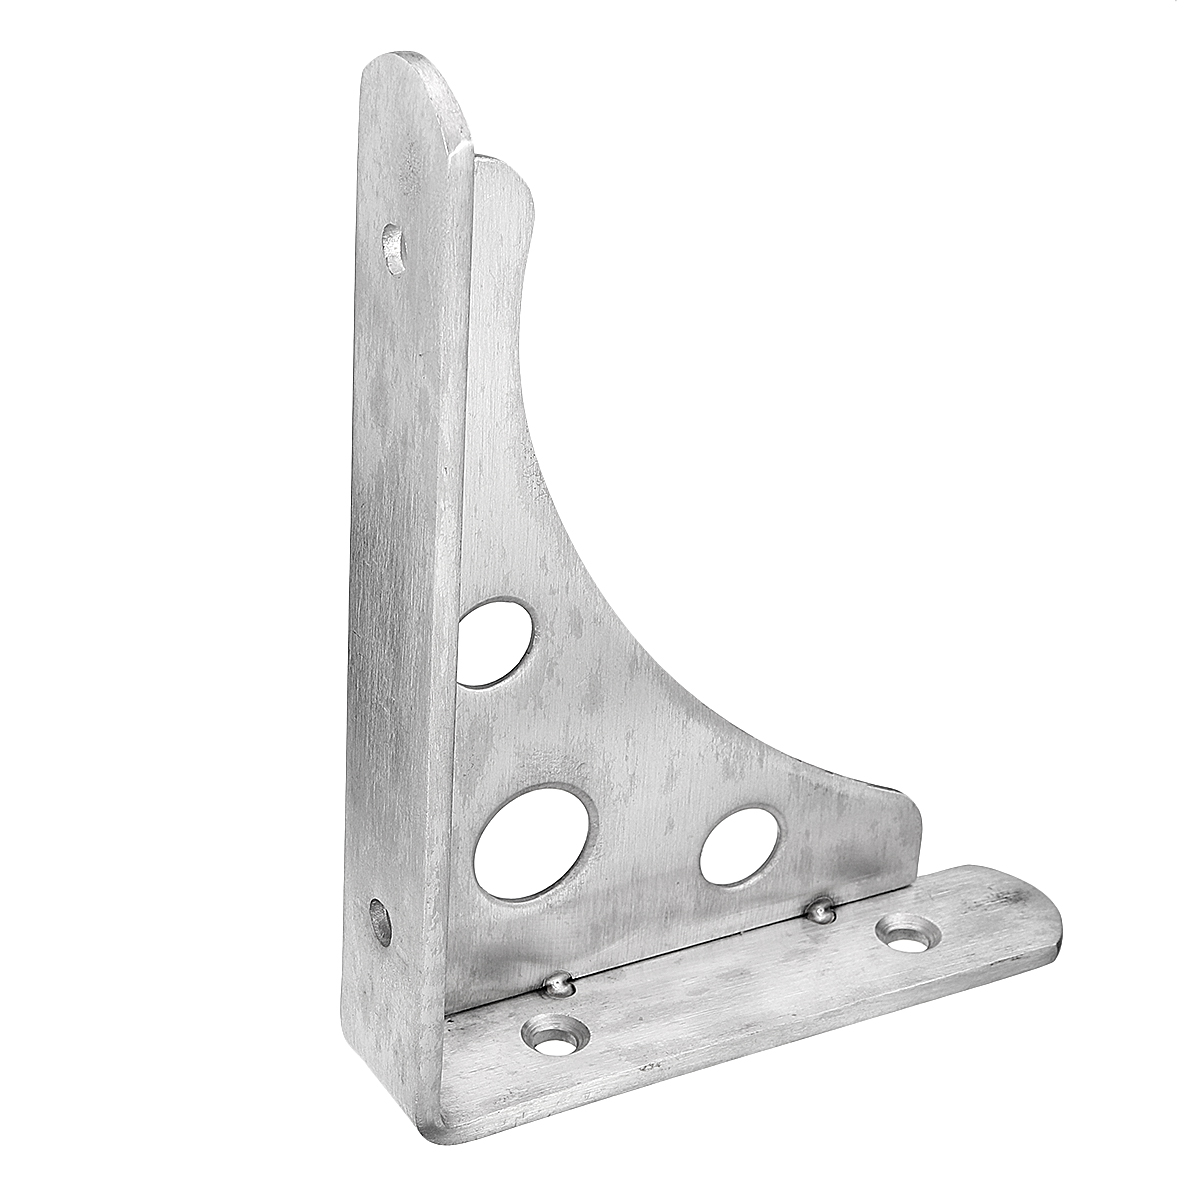 Thick-Stainless-Steel-Bracket-Partition-Load-Bearing-Bracket-Side-Left-And-Right-Tripod-Shelf-Rack-1639406-1